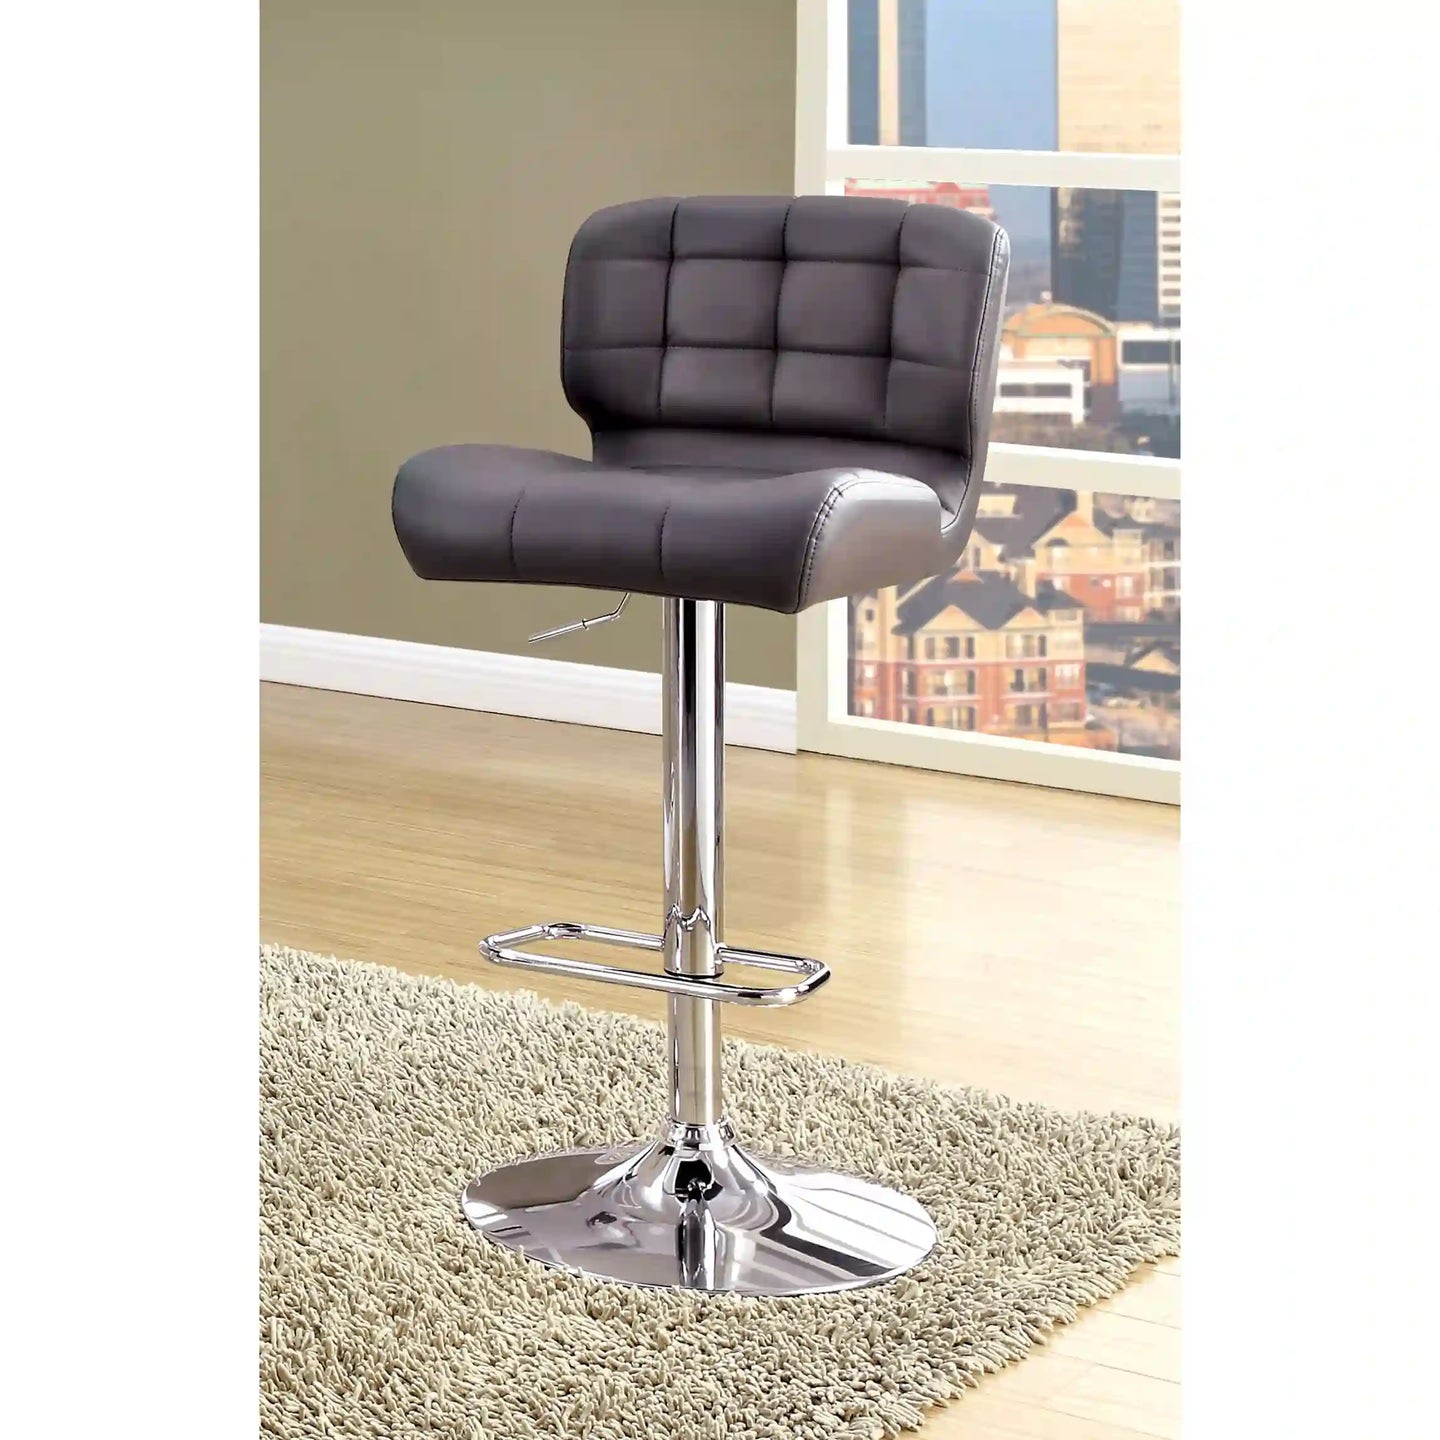 Furniture of America Hovey Contemporary Swivel Bar Stool in Gray - IDF-BR6152GY